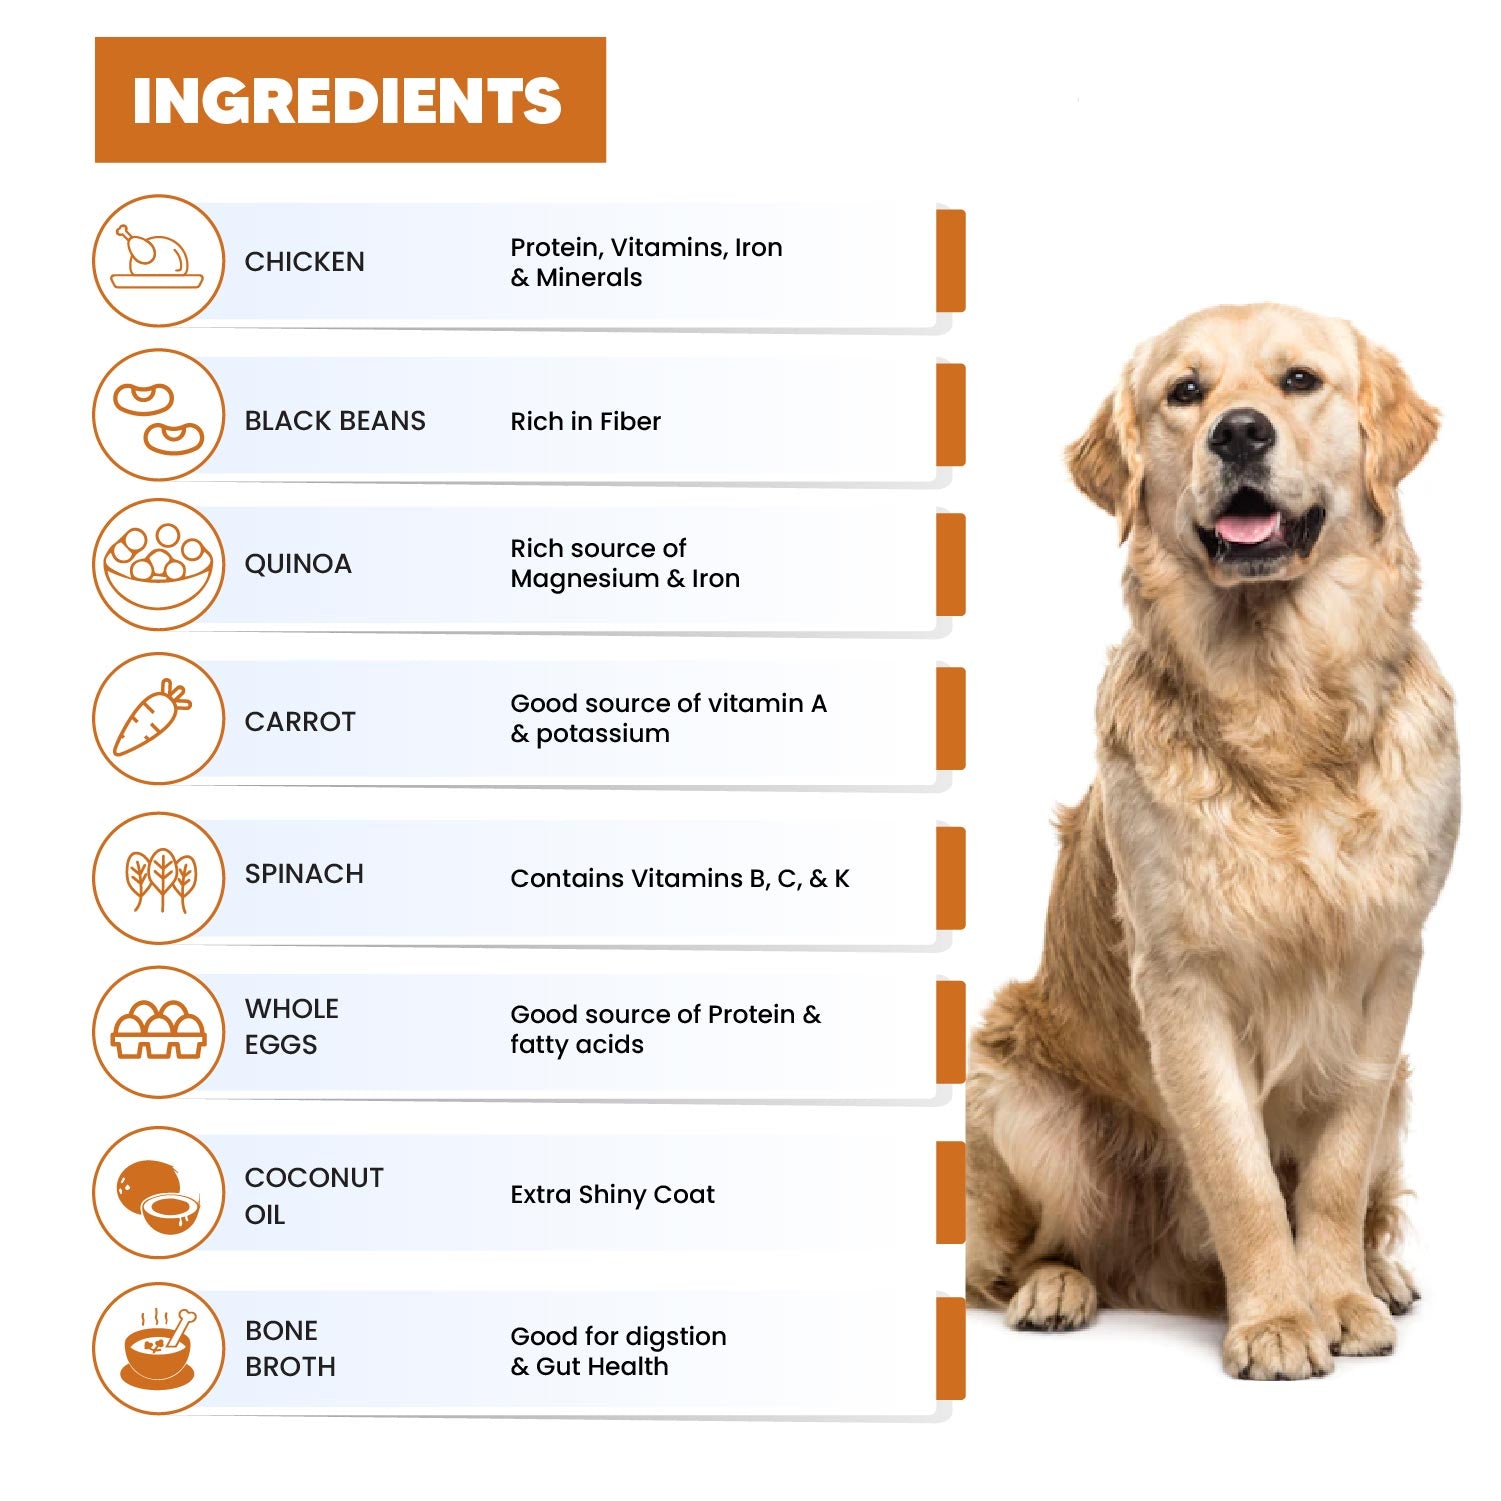 Ingredients of chicken food for dogs and puppies from goofytails.com